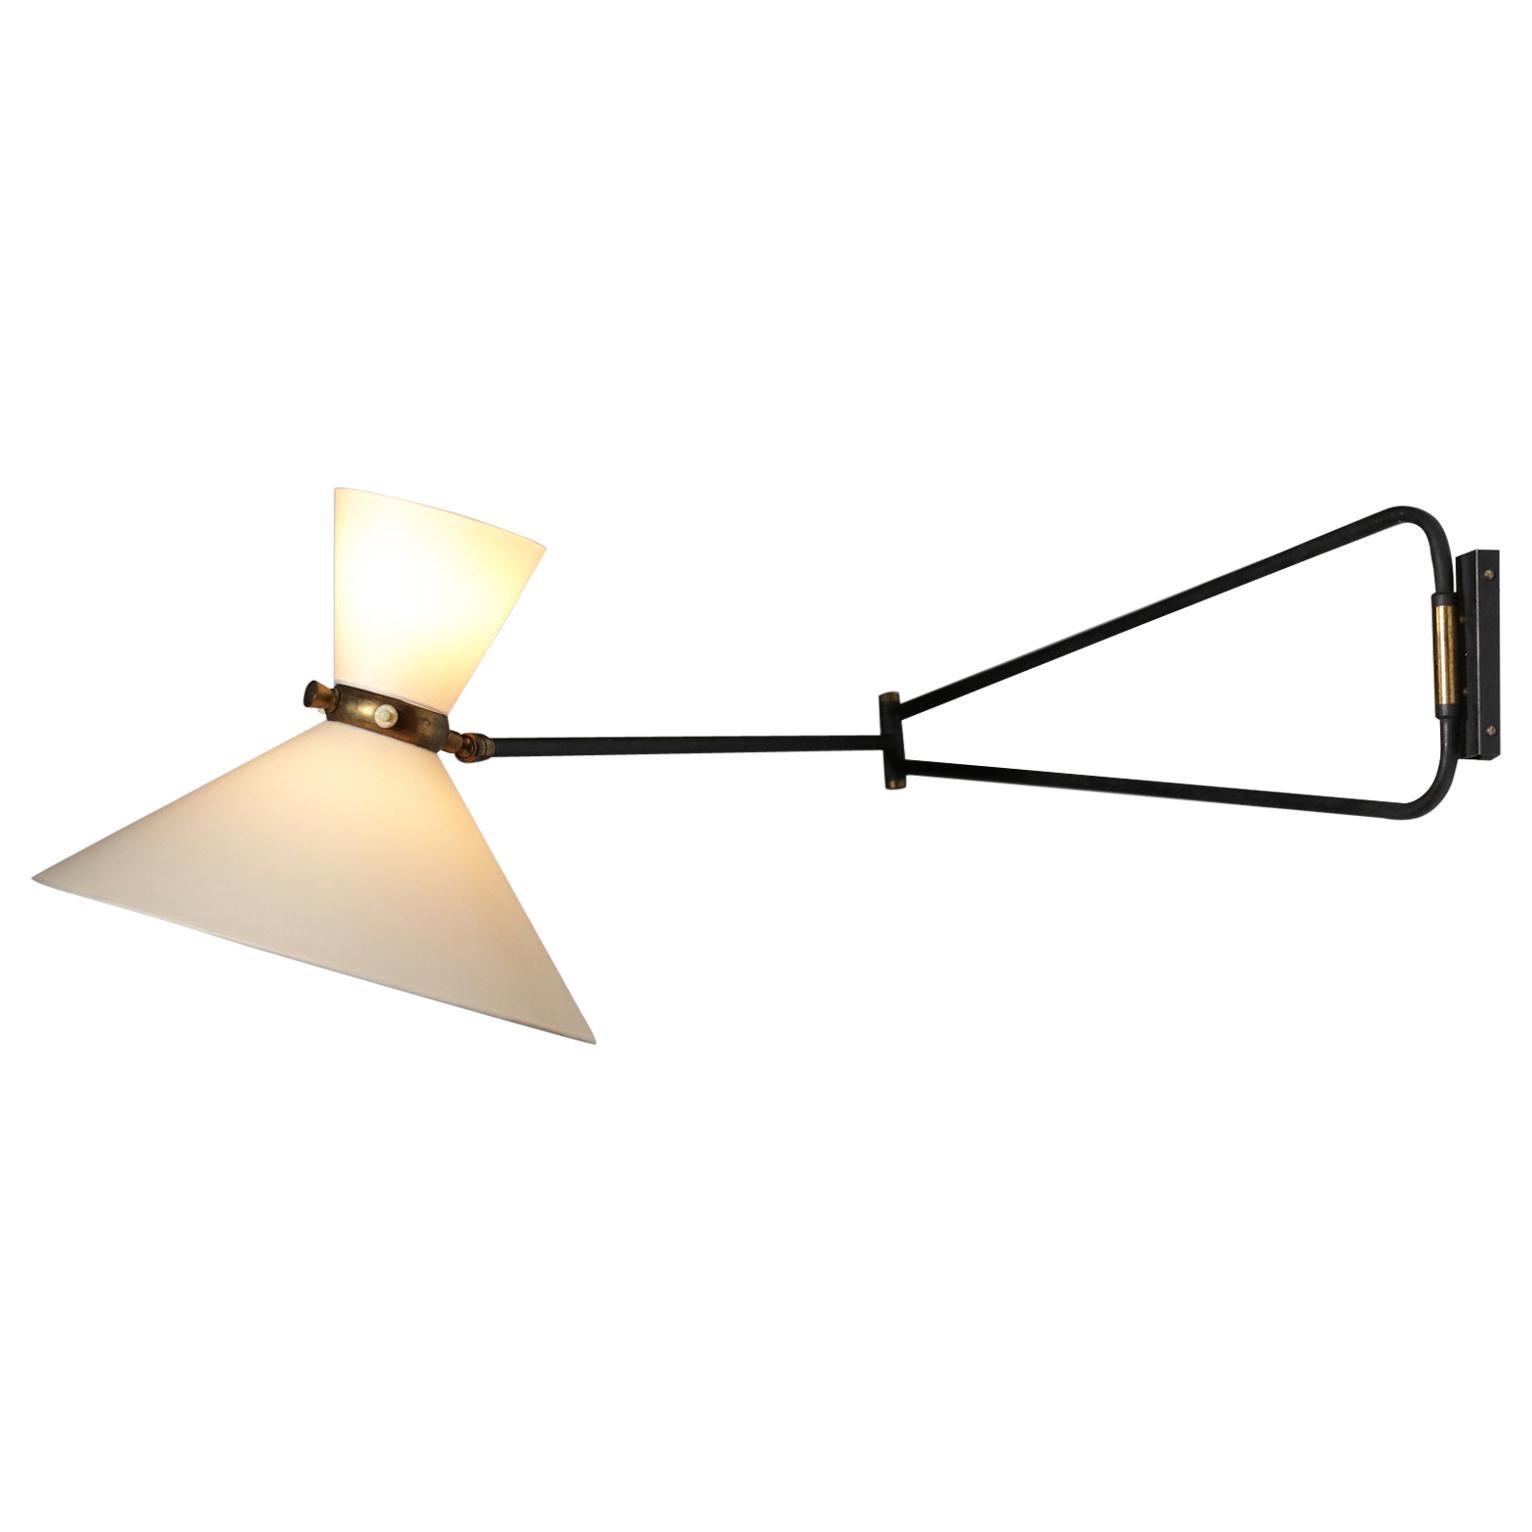 Large wall lamp from the 50's in the style of René Mathieu's work, edited by Maison Lunel. Original black lacquered metal and brass structure. The lampshades have been redone. Very nice patina and good condition (see pictures).